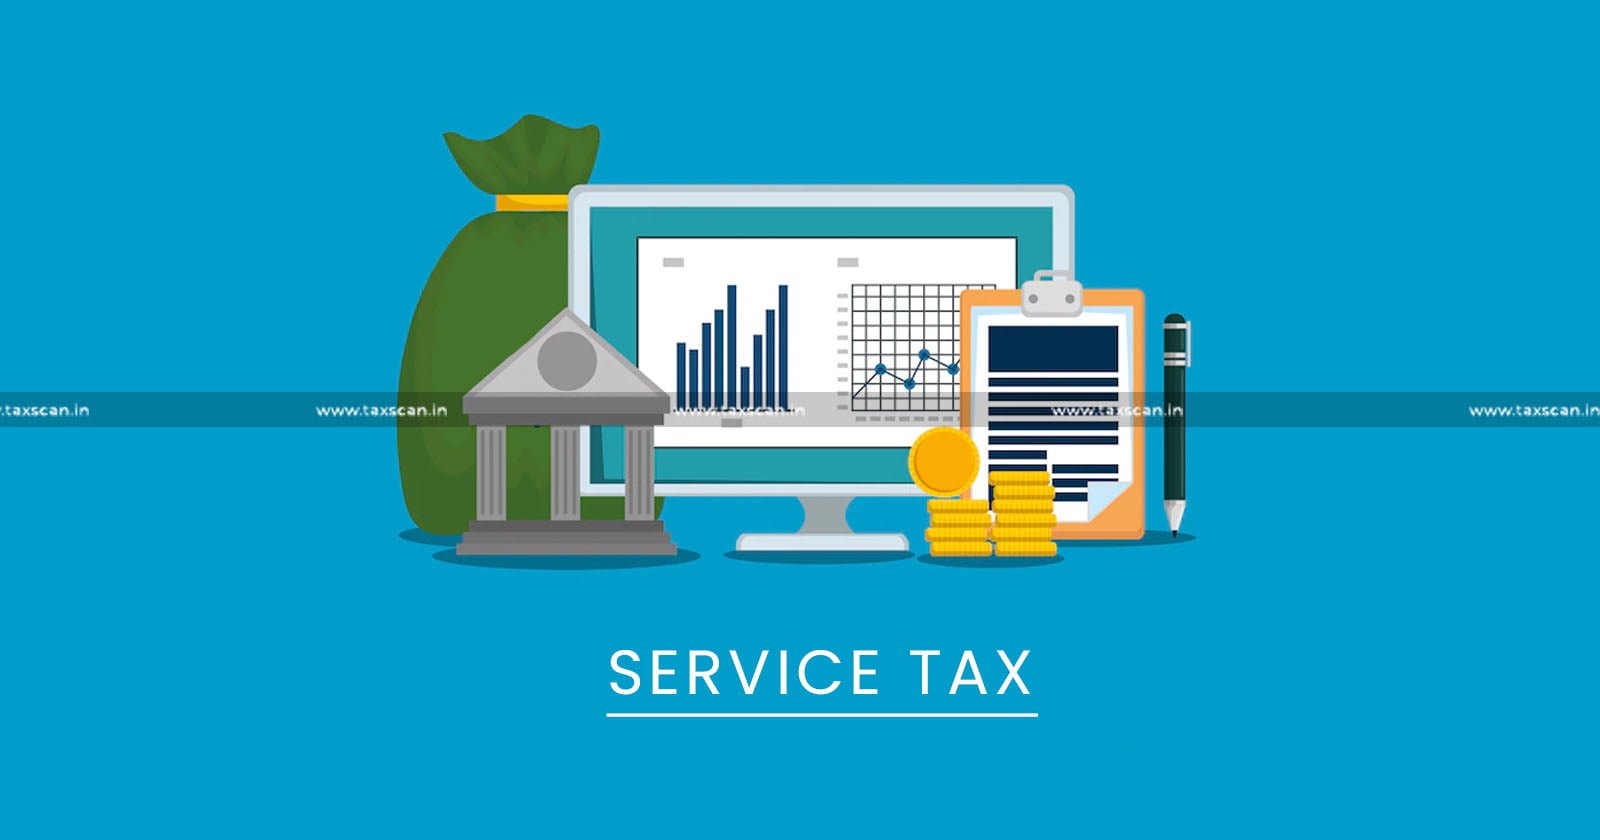 Amount collected - Administrative and Handling Charges From their Sister Concerns - Business Support Services - Service Tax Liability - CESTAT - Administrative and Handling Charges -Service Tax - taxscan